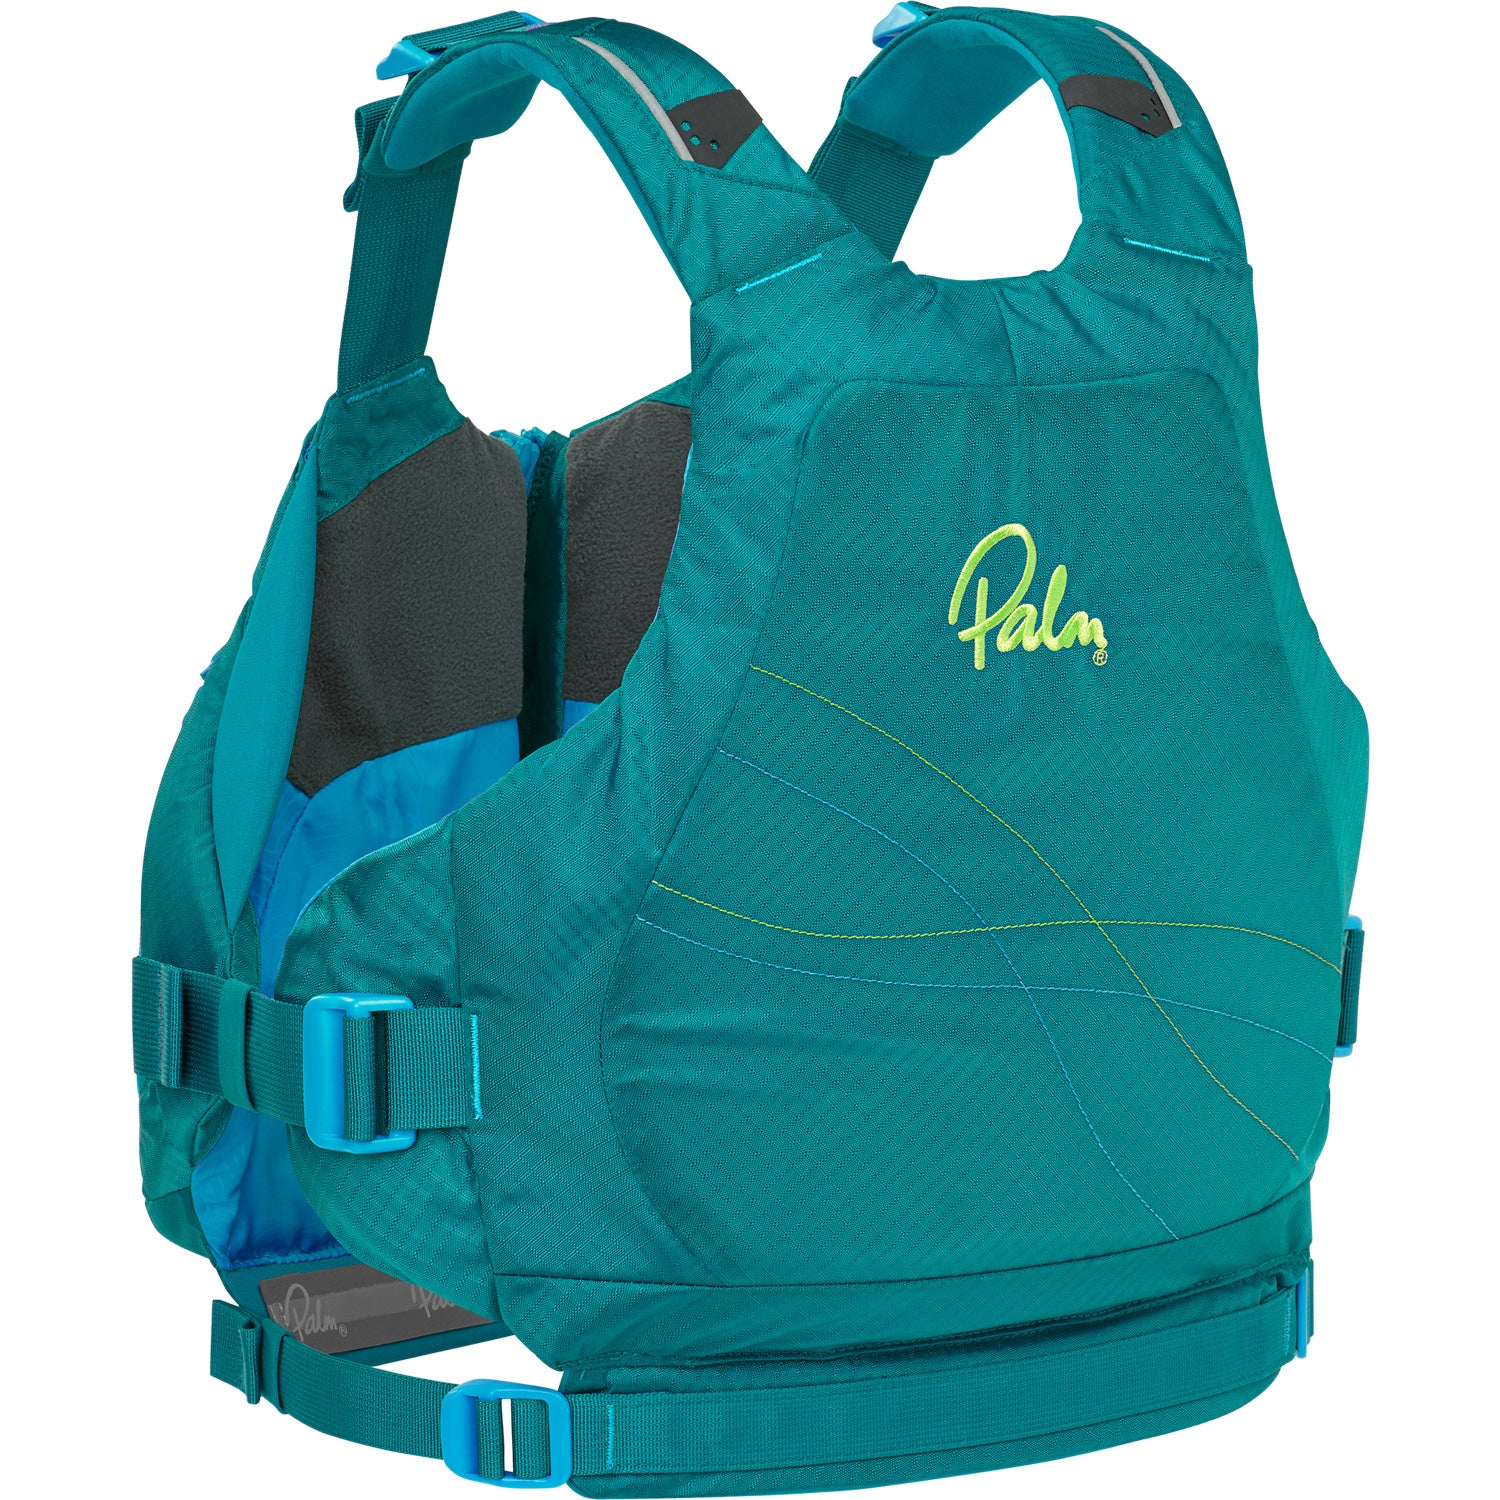 Palm Tika Women's buoyancy aid in Teal from the rear